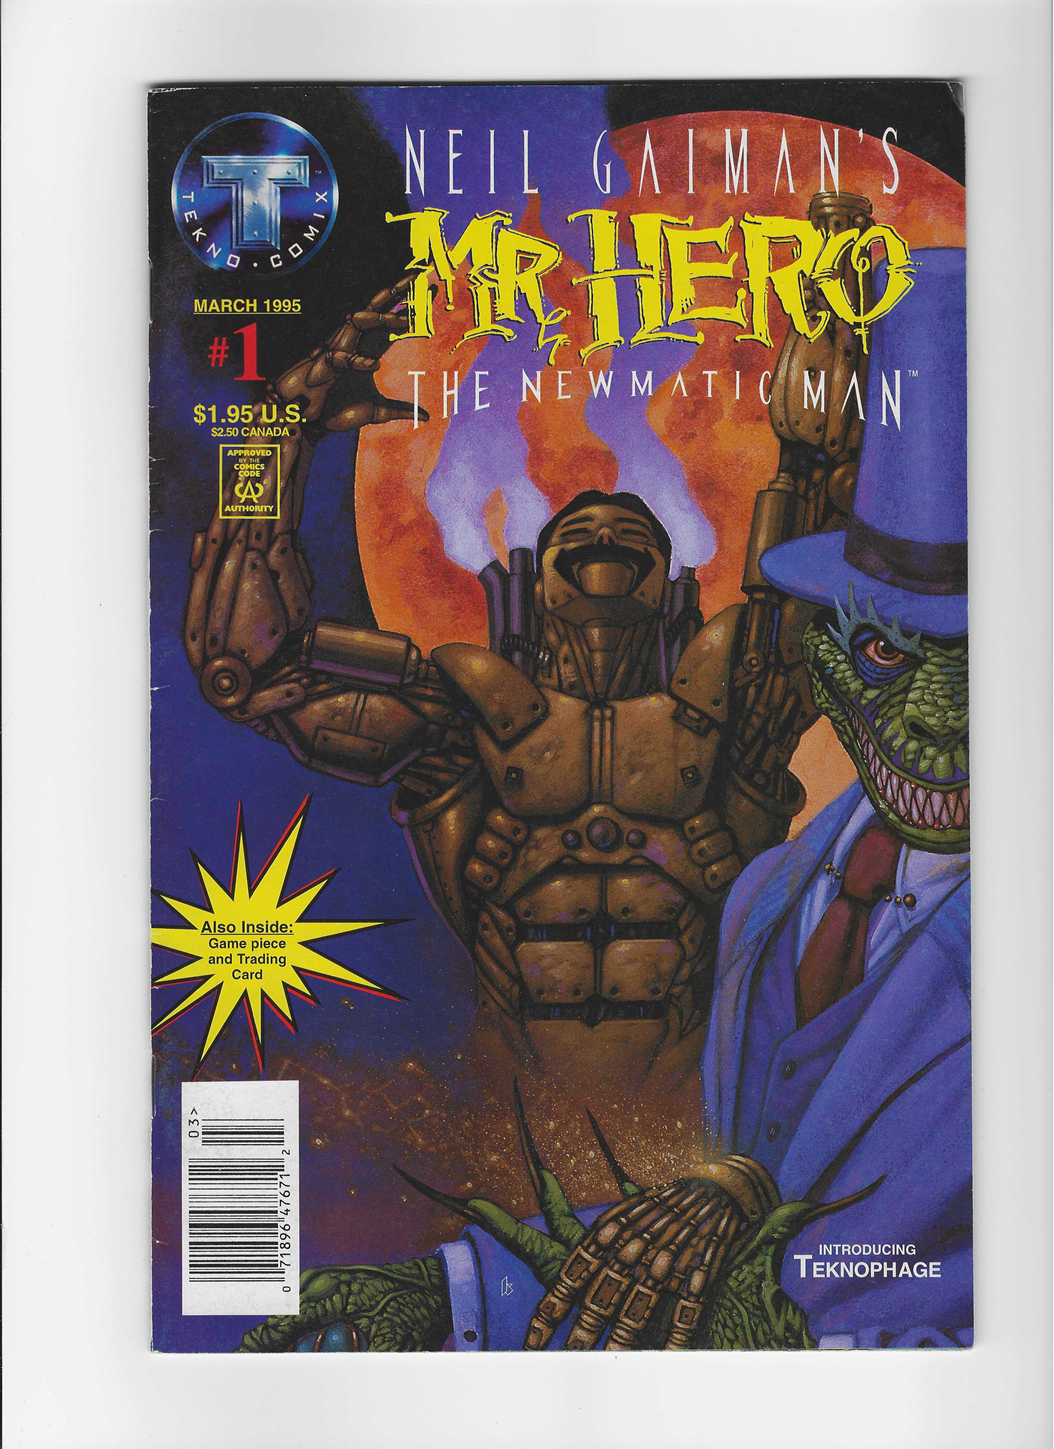 Neil Gaiman's Mr. Hero: The Newmatic Man, Vol. 1 #1A - With Cards